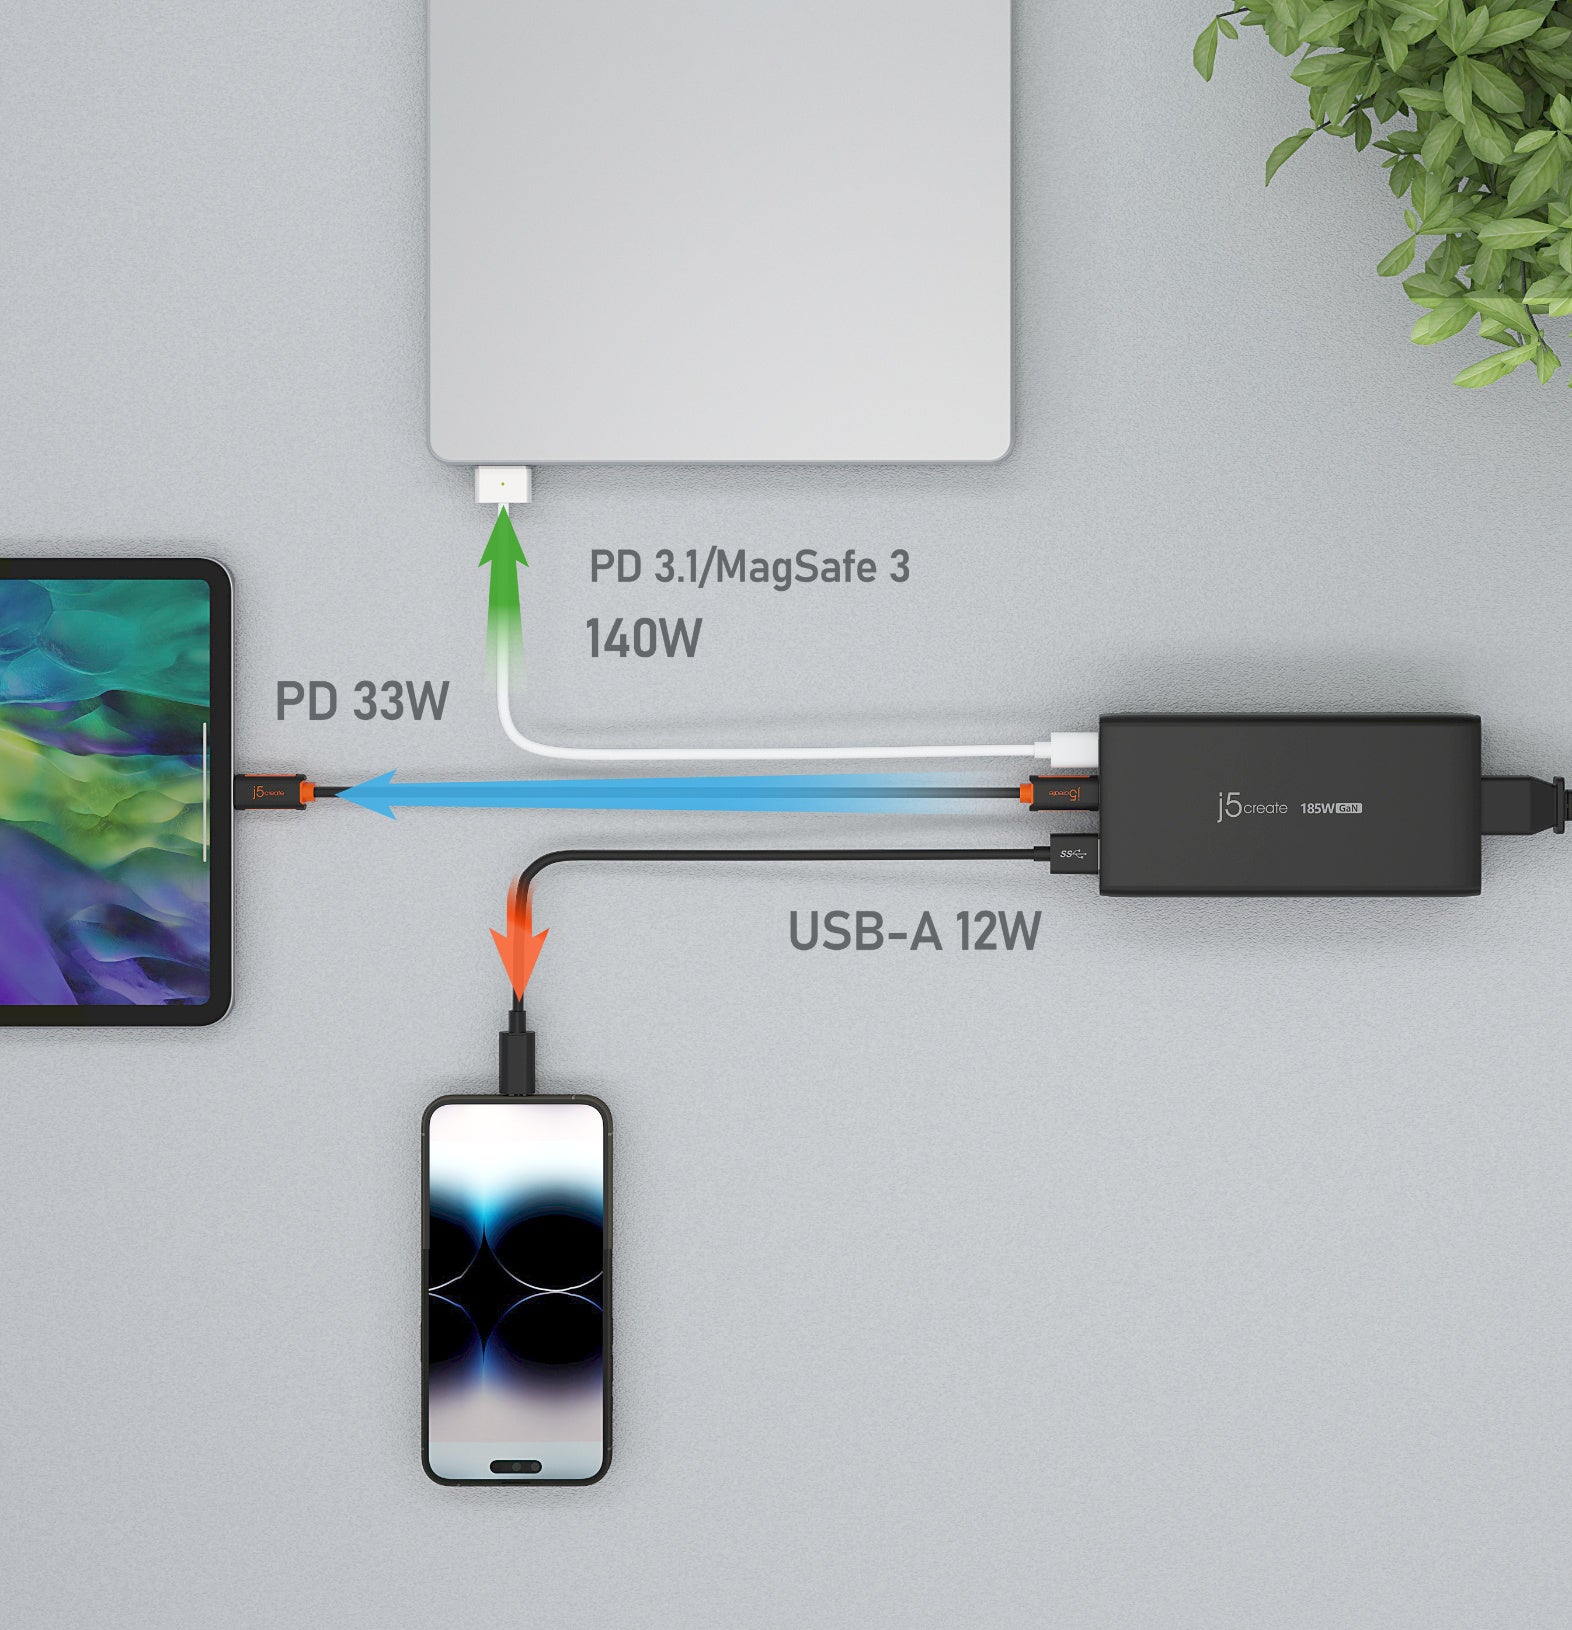 USB-C Ethernet adapter/USB hub with simultaneous charging and